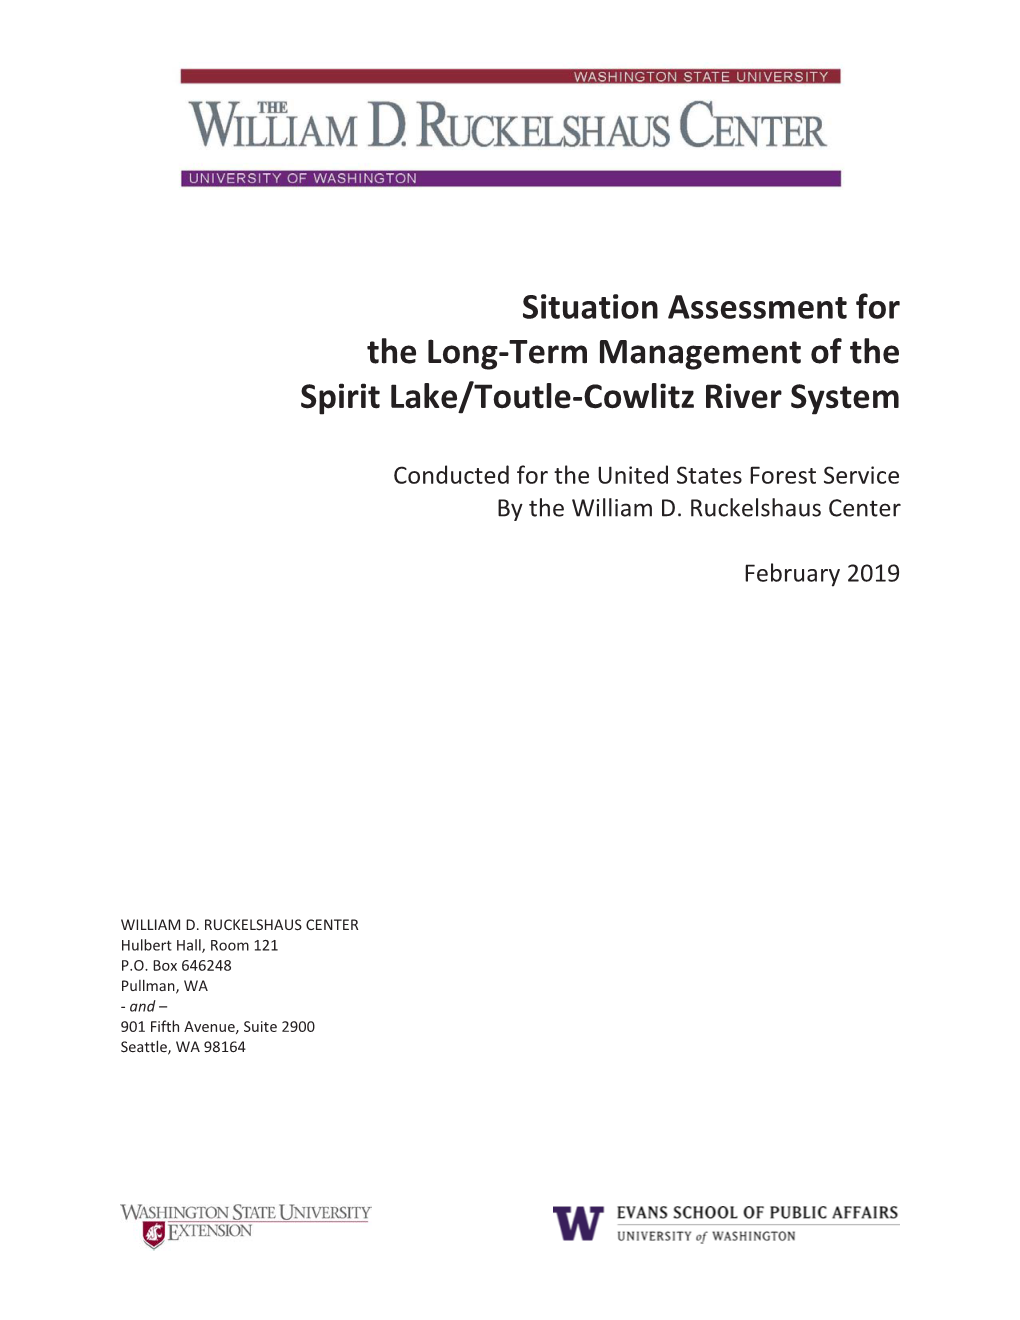 Situation Assessment for the Long-Term Management of the Spirit Lake/Toutle-Cowlitz River System